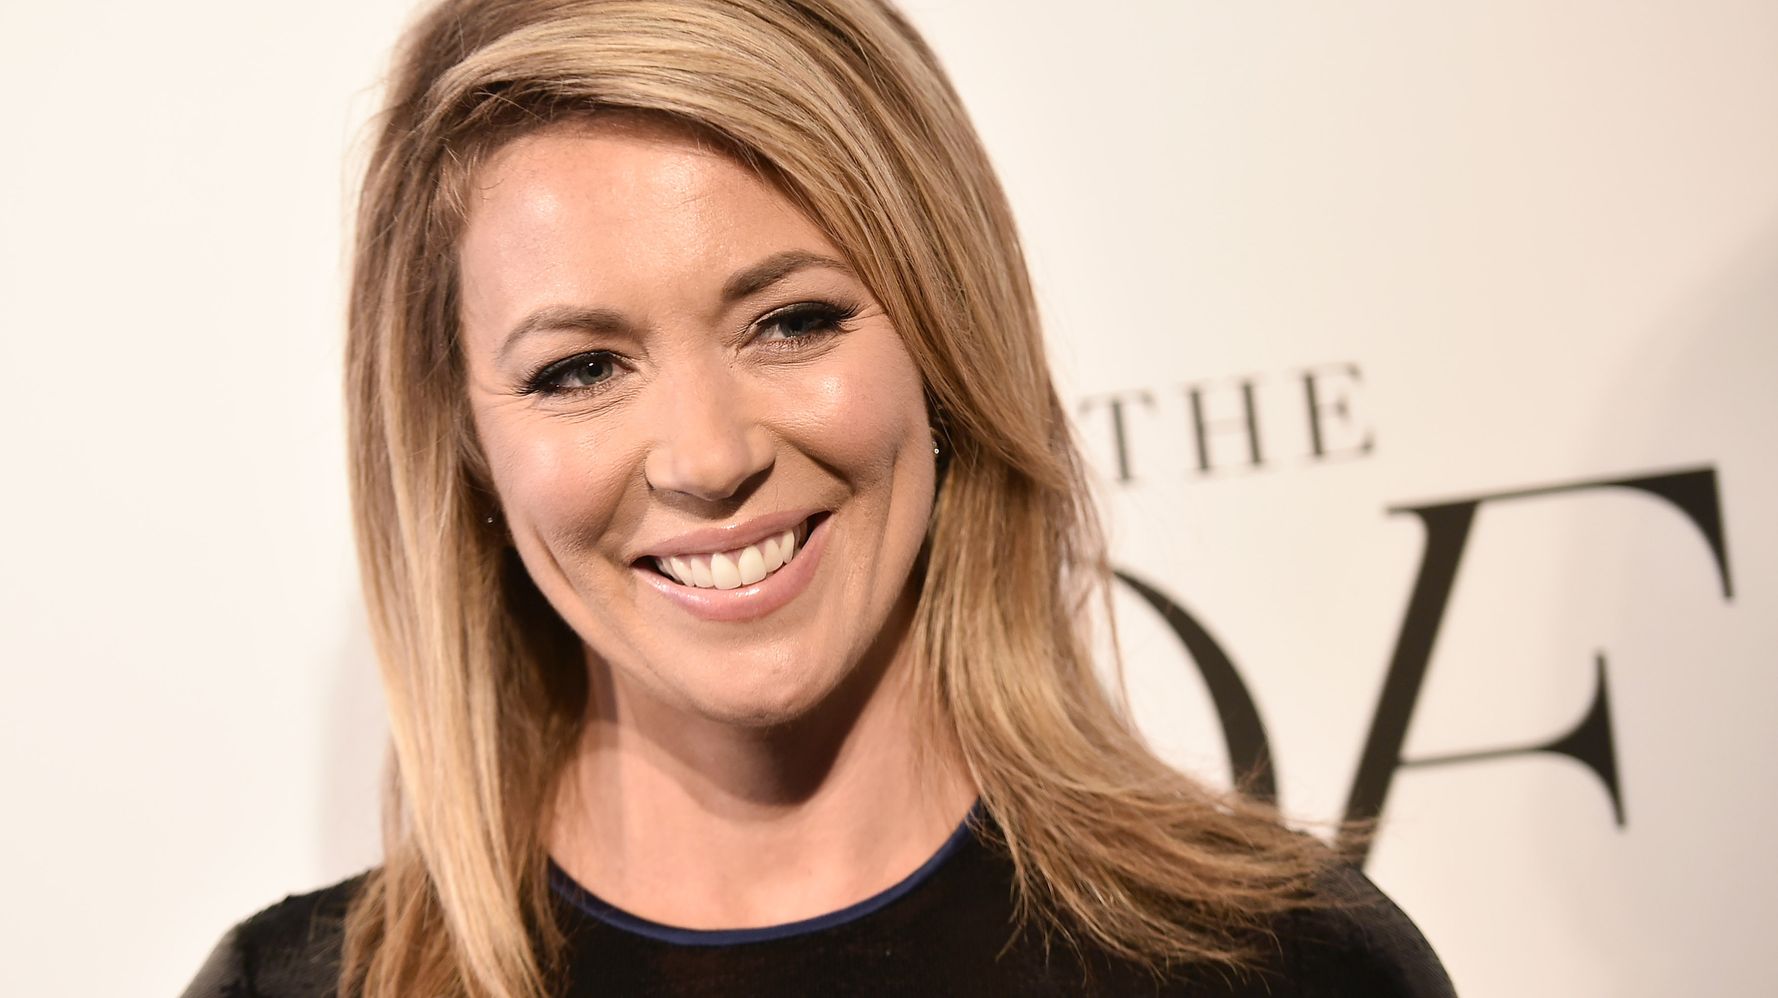 Brooke Baldwin announces she’s leaving CNN: ‘I just need to do more’